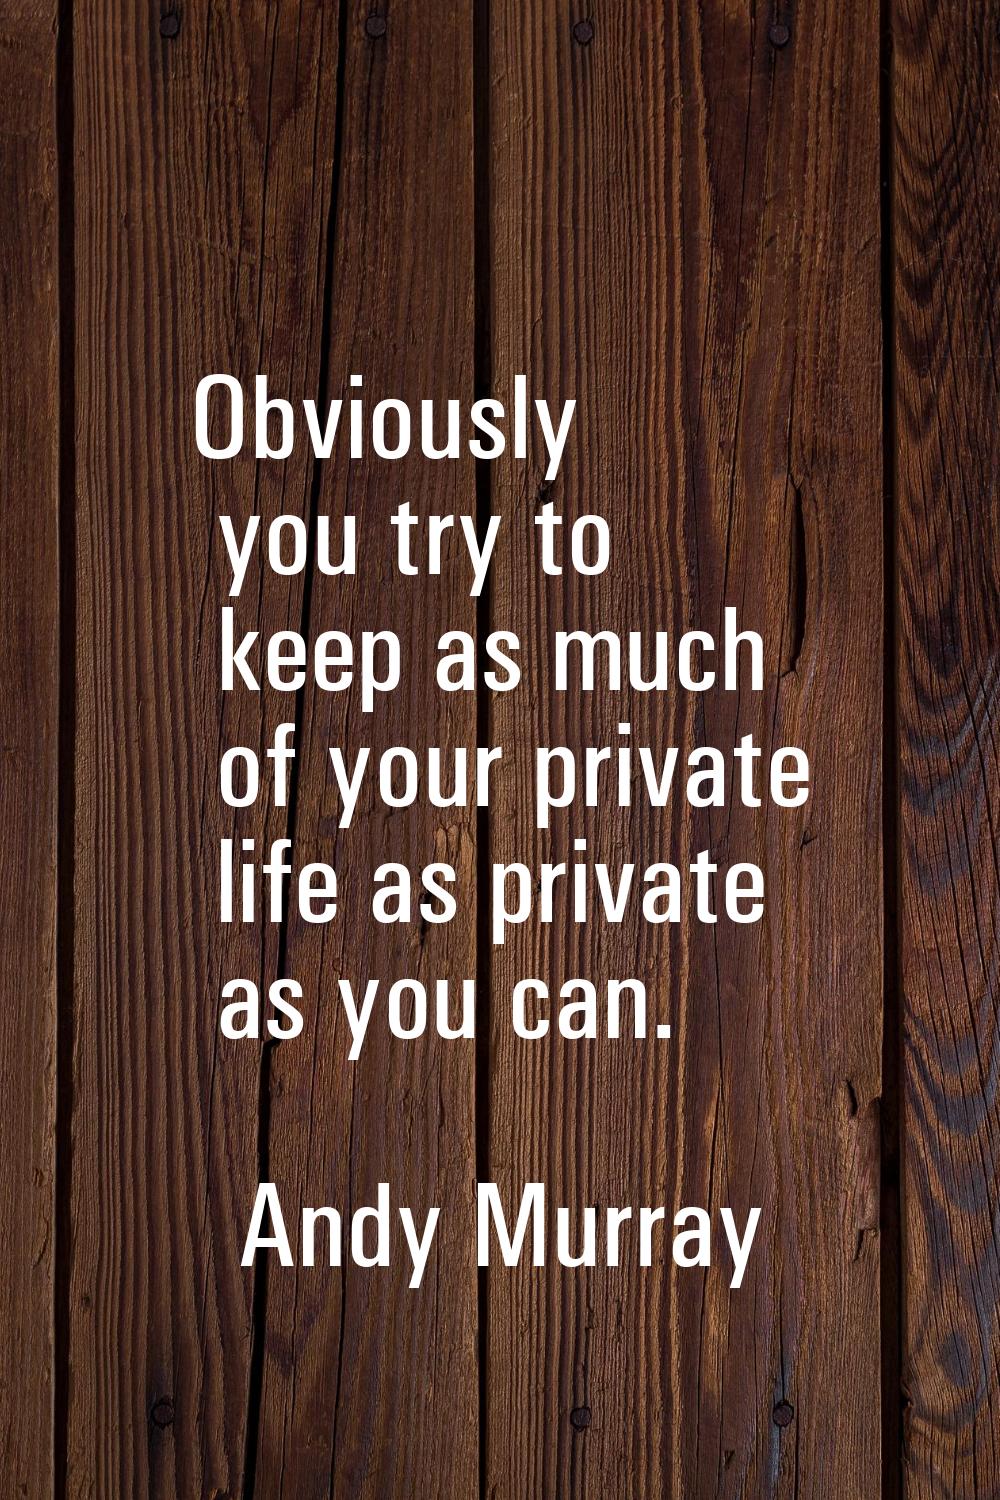 Obviously you try to keep as much of your private life as private as you can.